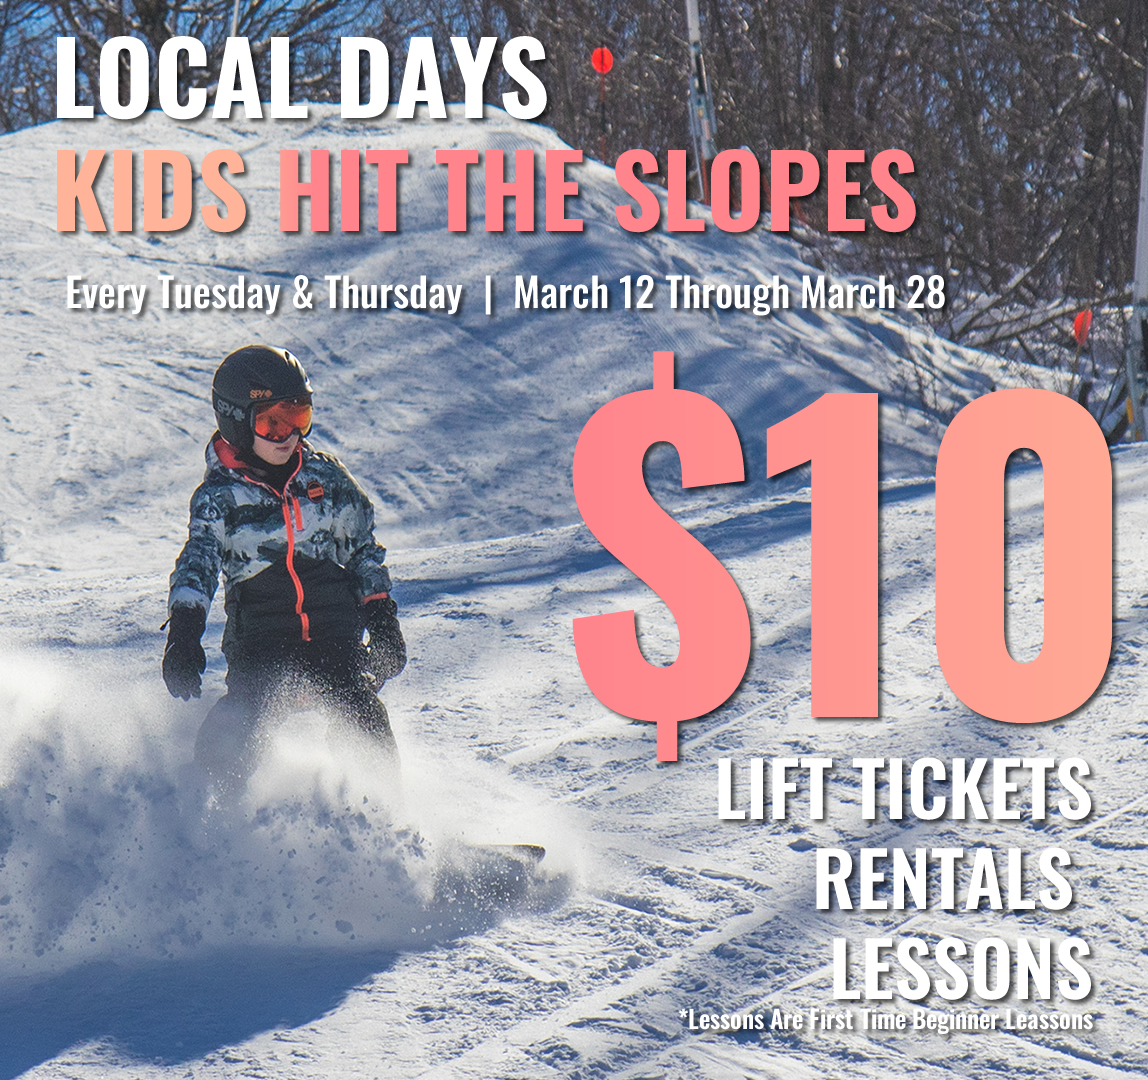 Local Days - Kids Hit The Slopes